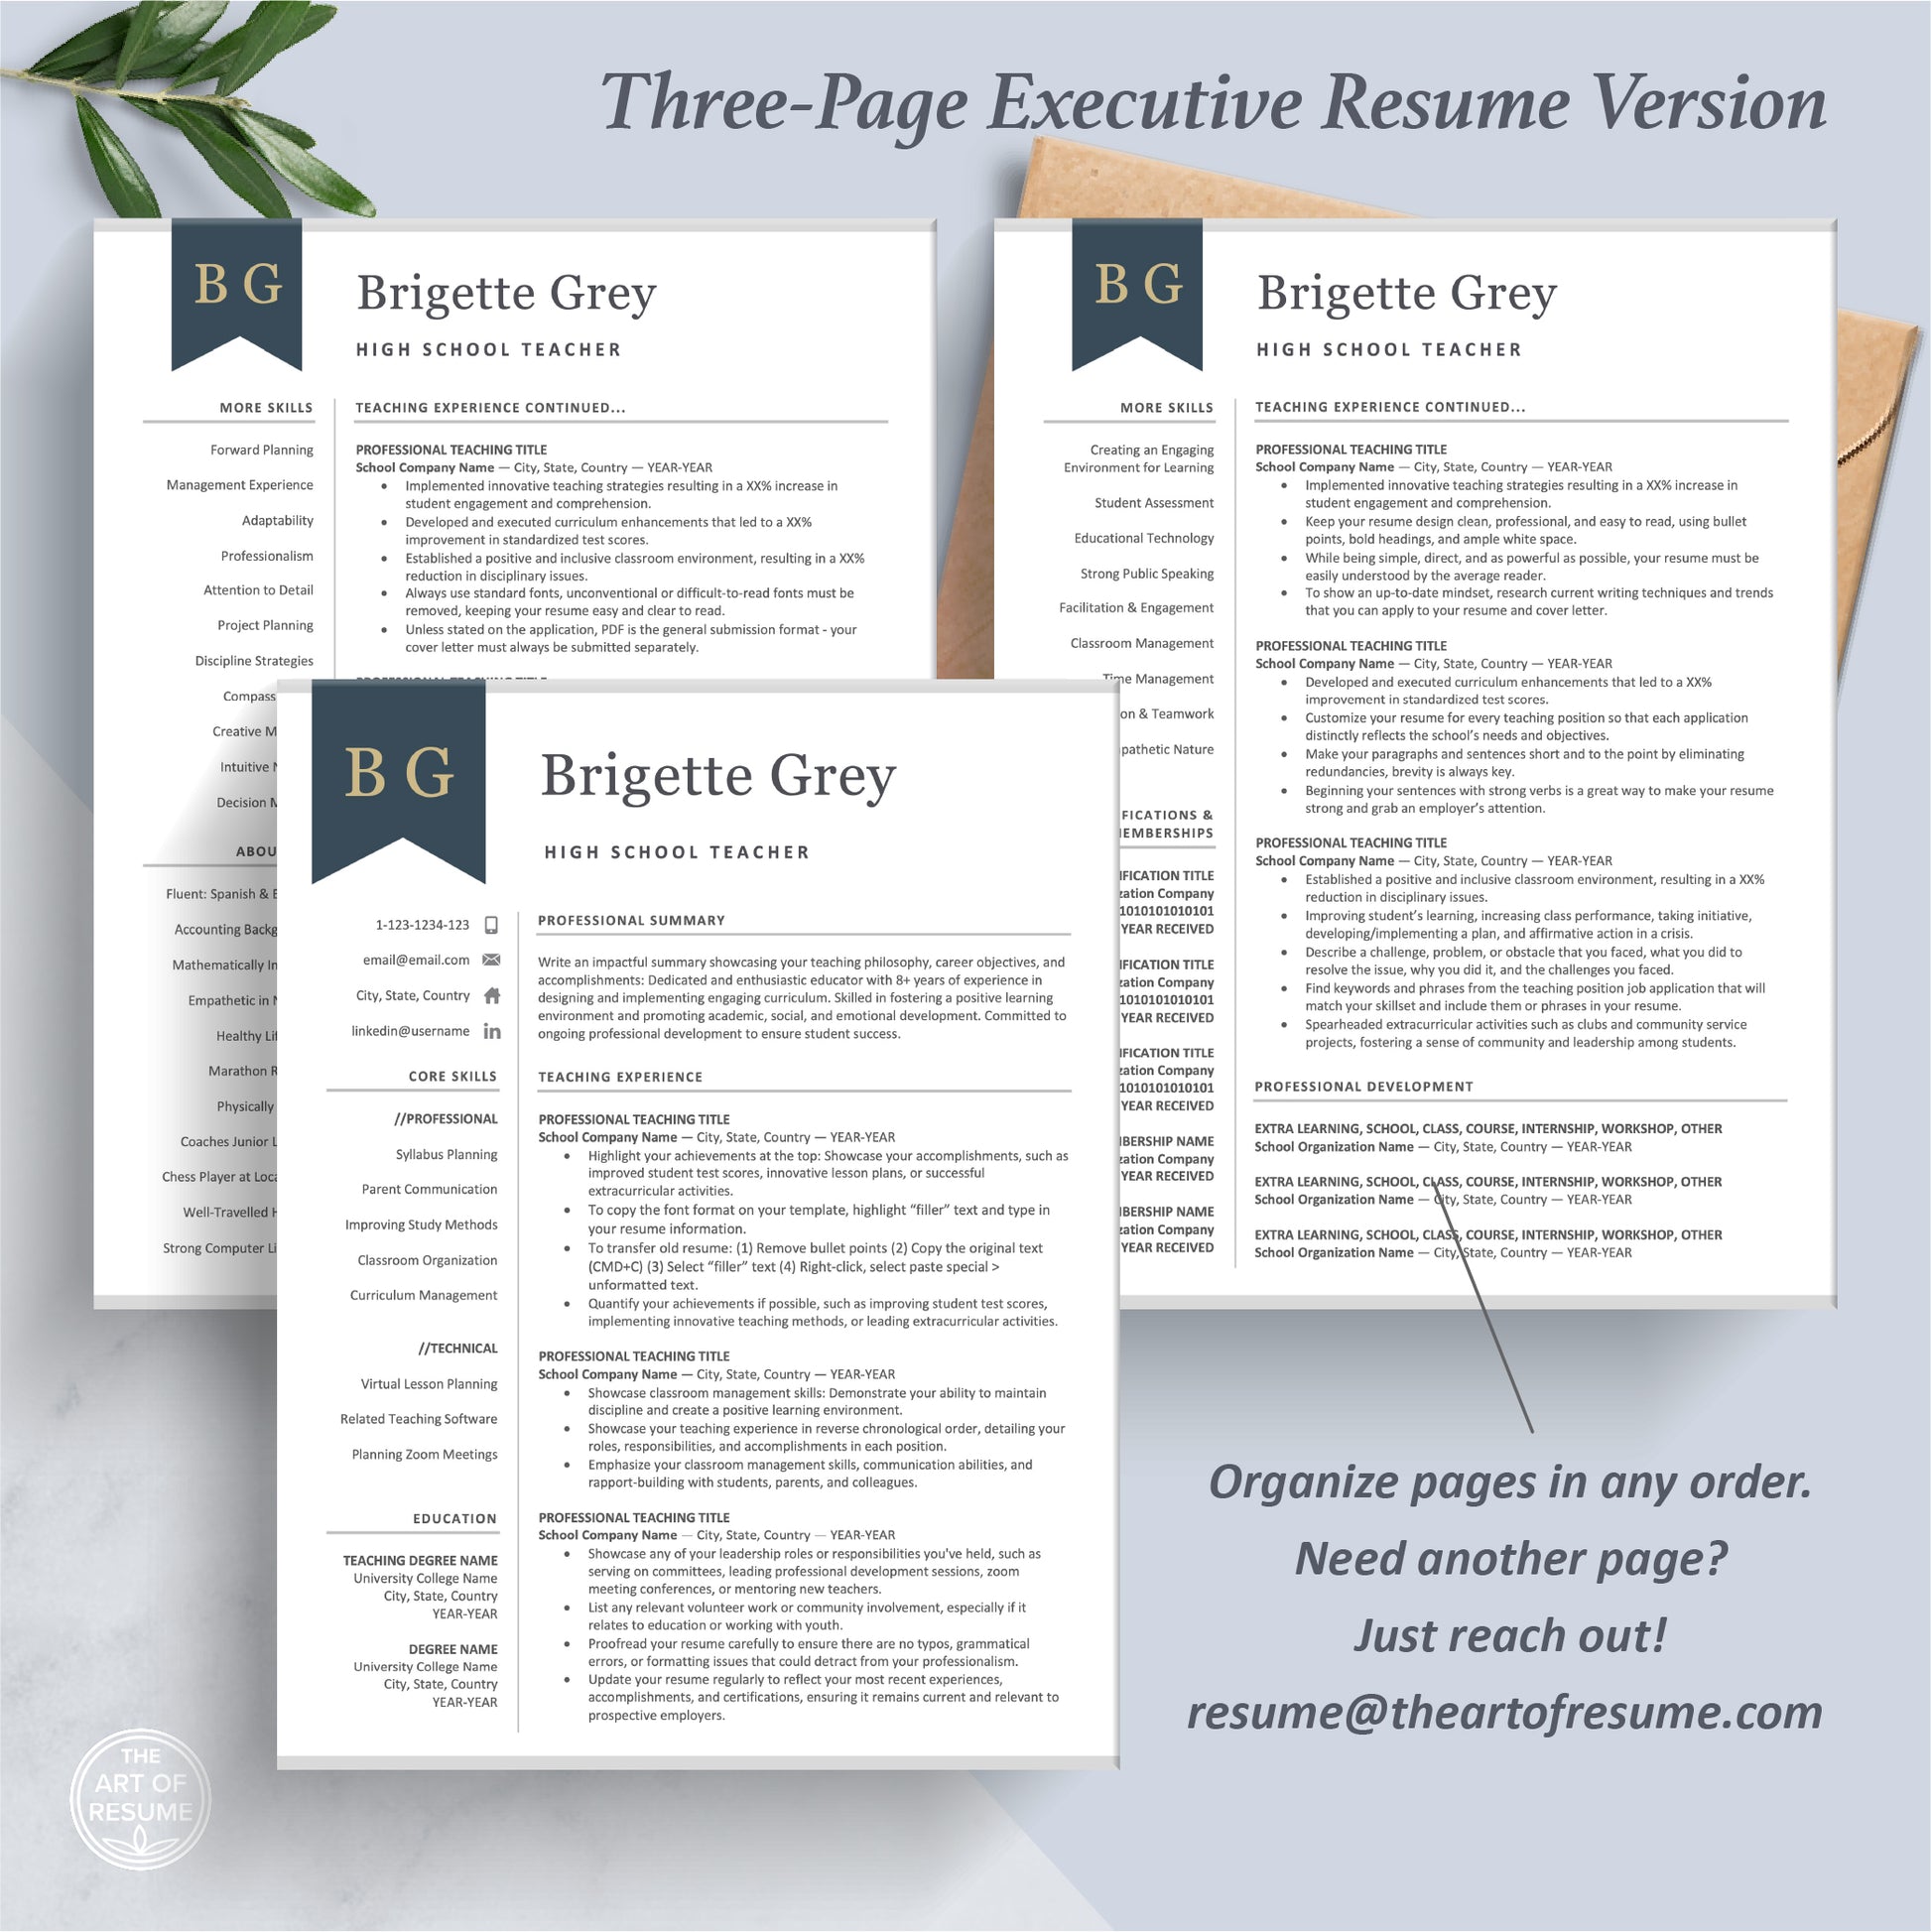 The Art of Resume Professional Navy Blue Teacher Resume Template Bundle | 3 Page Executive Teaching Resume Format